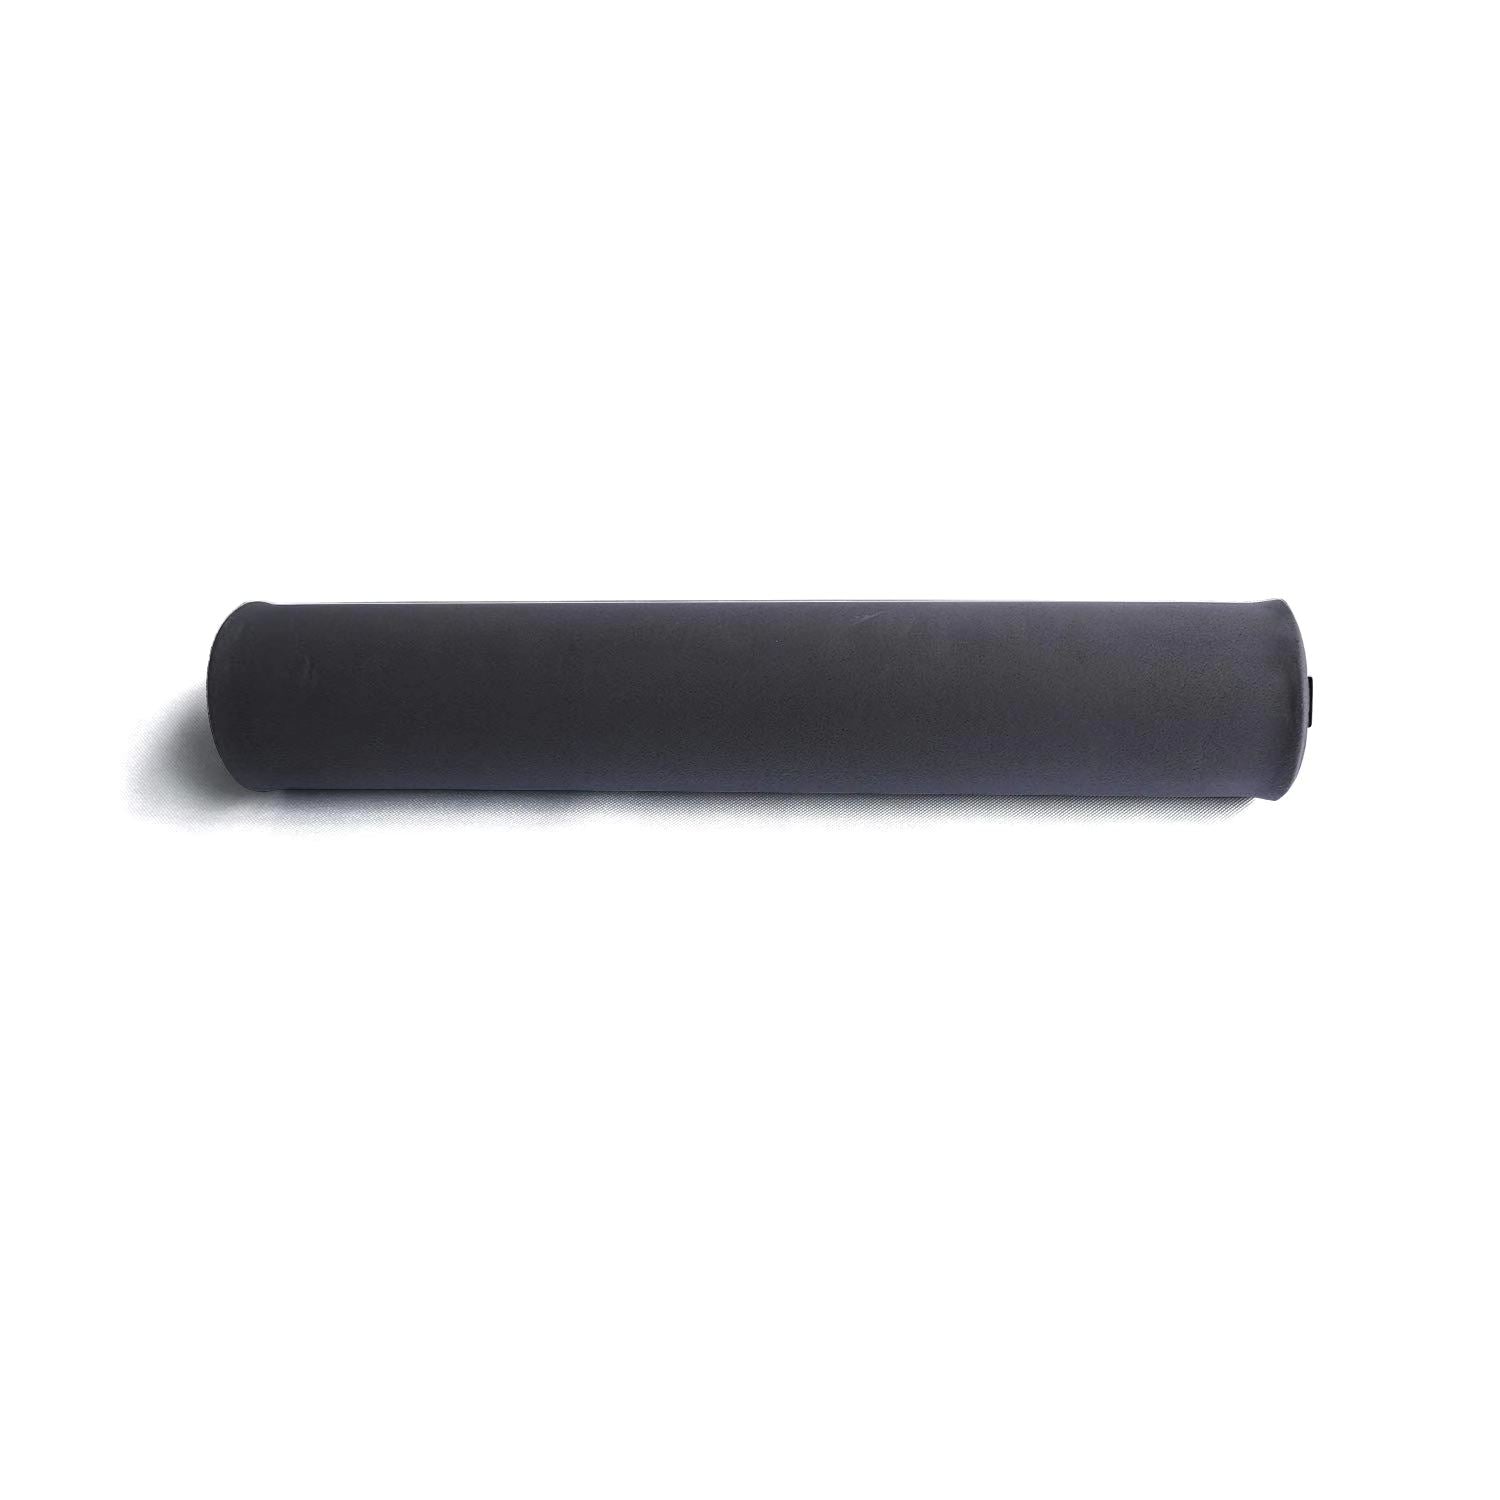 Hizero Polymer Cleaning Roller